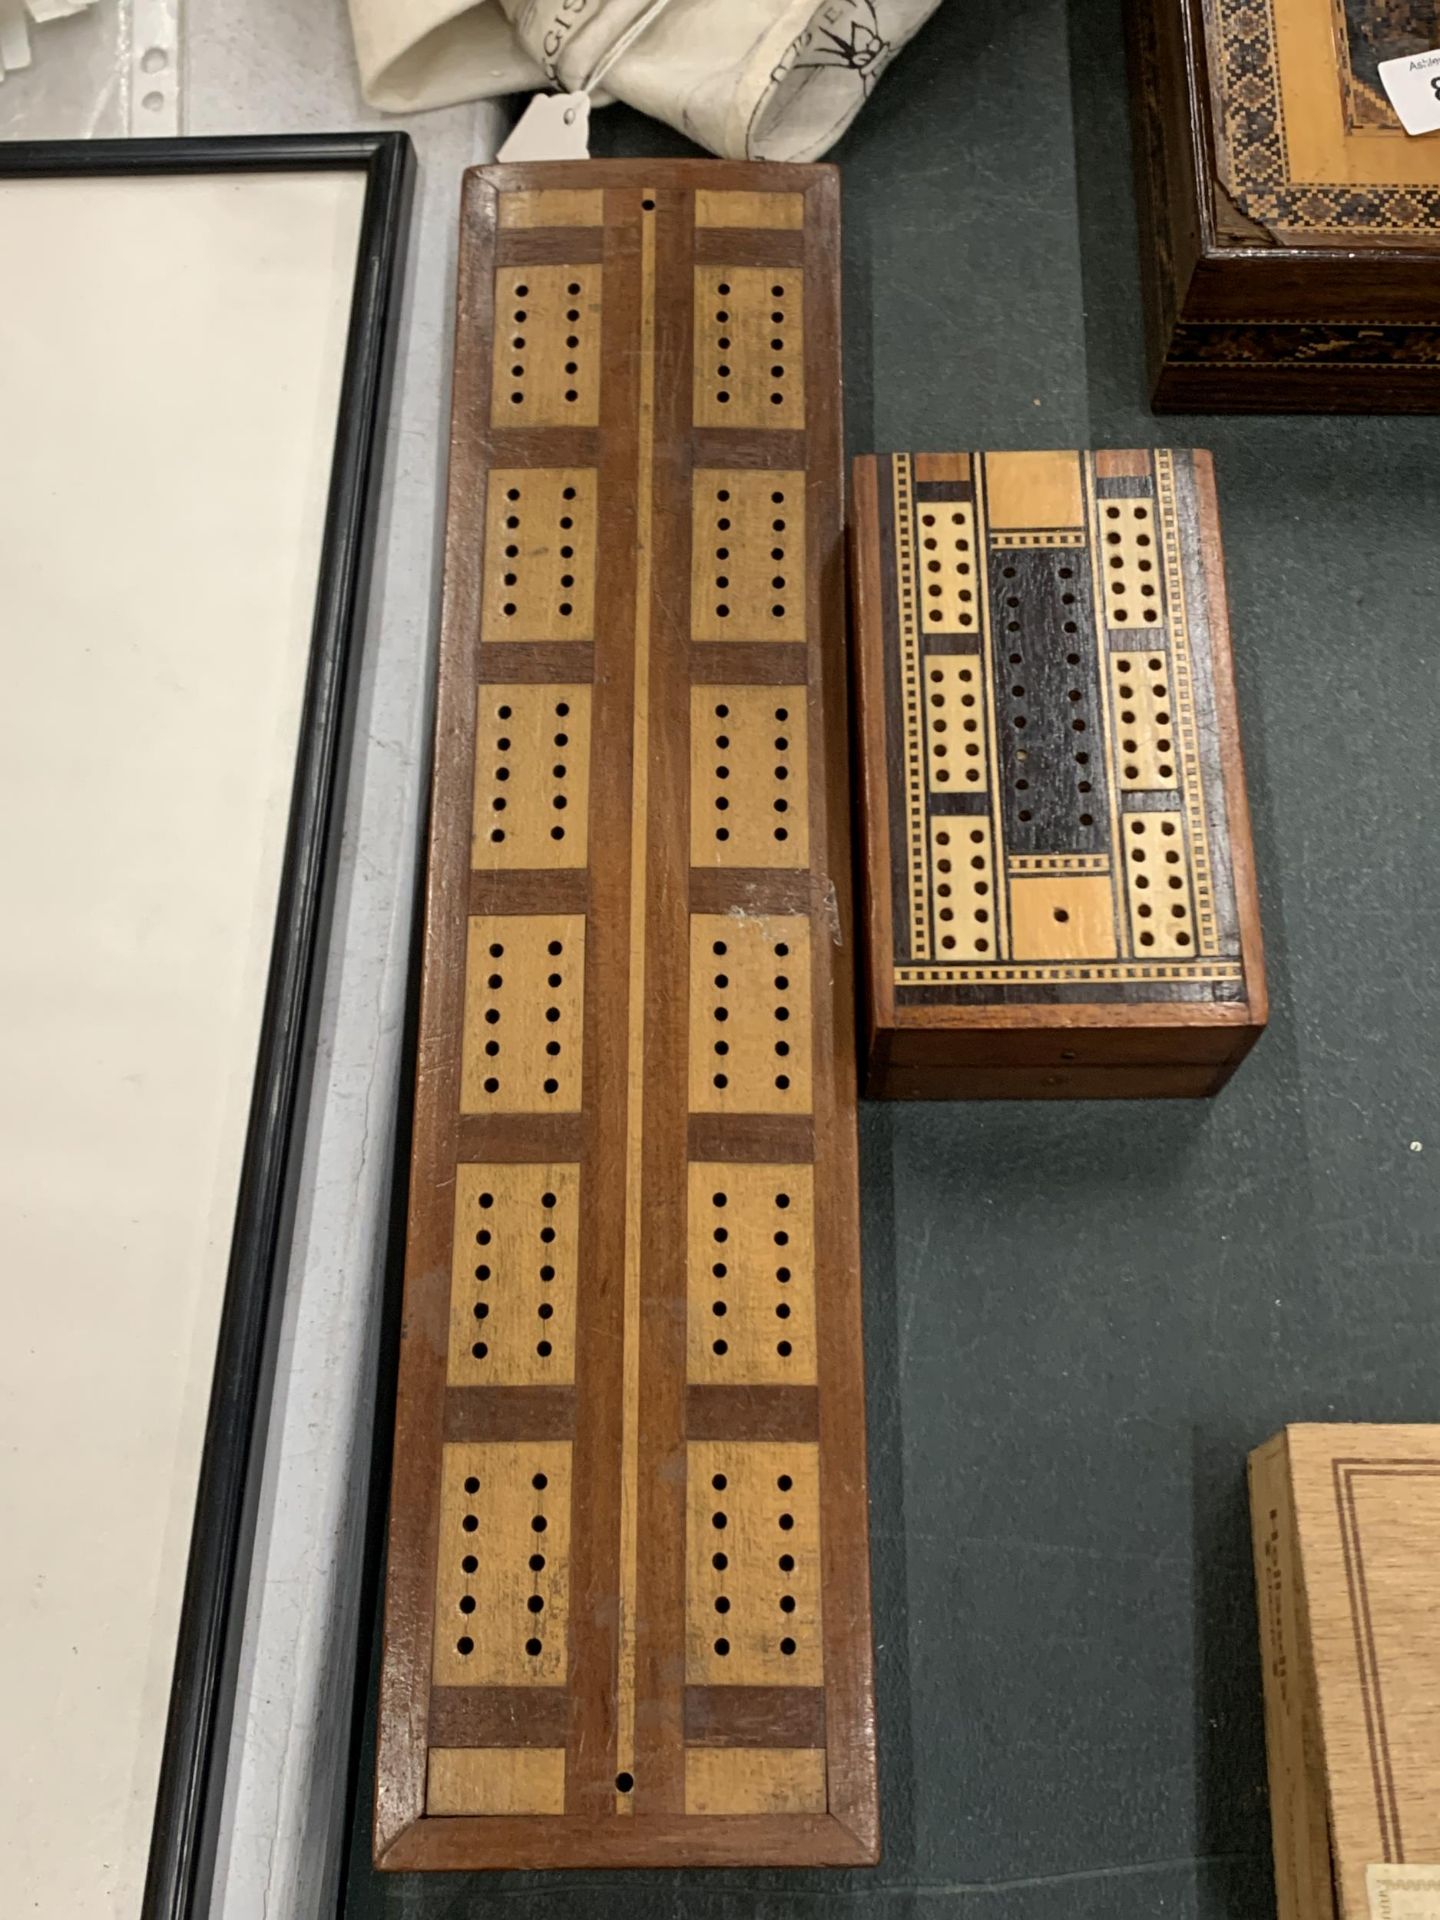 TWO CRIBBAGE BOARDS